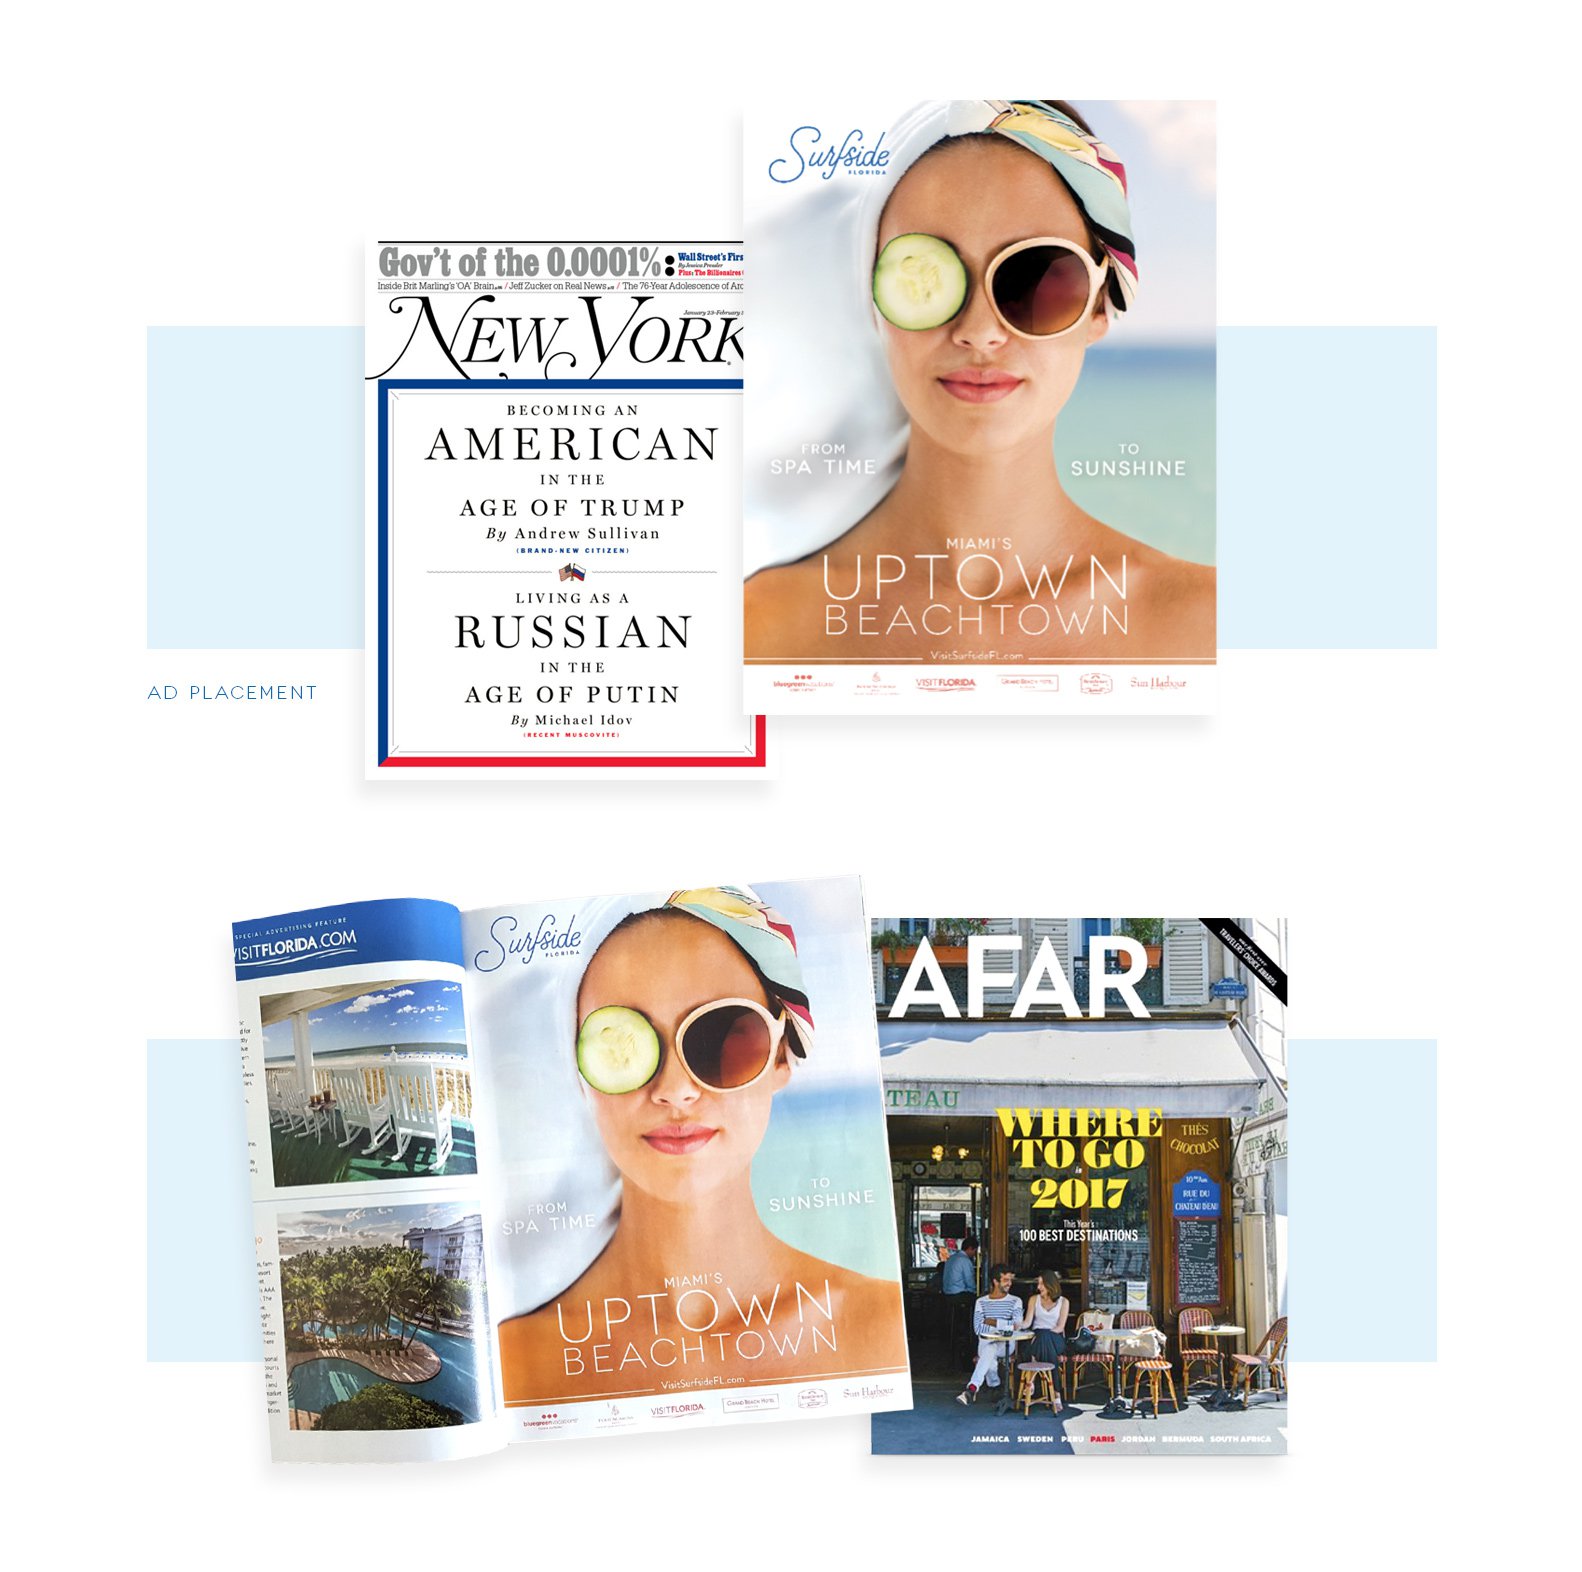 Jacober Creative Identity and Campaign for the Town of Surfside Florida - Photo of magazine ad featured in New York Magazine